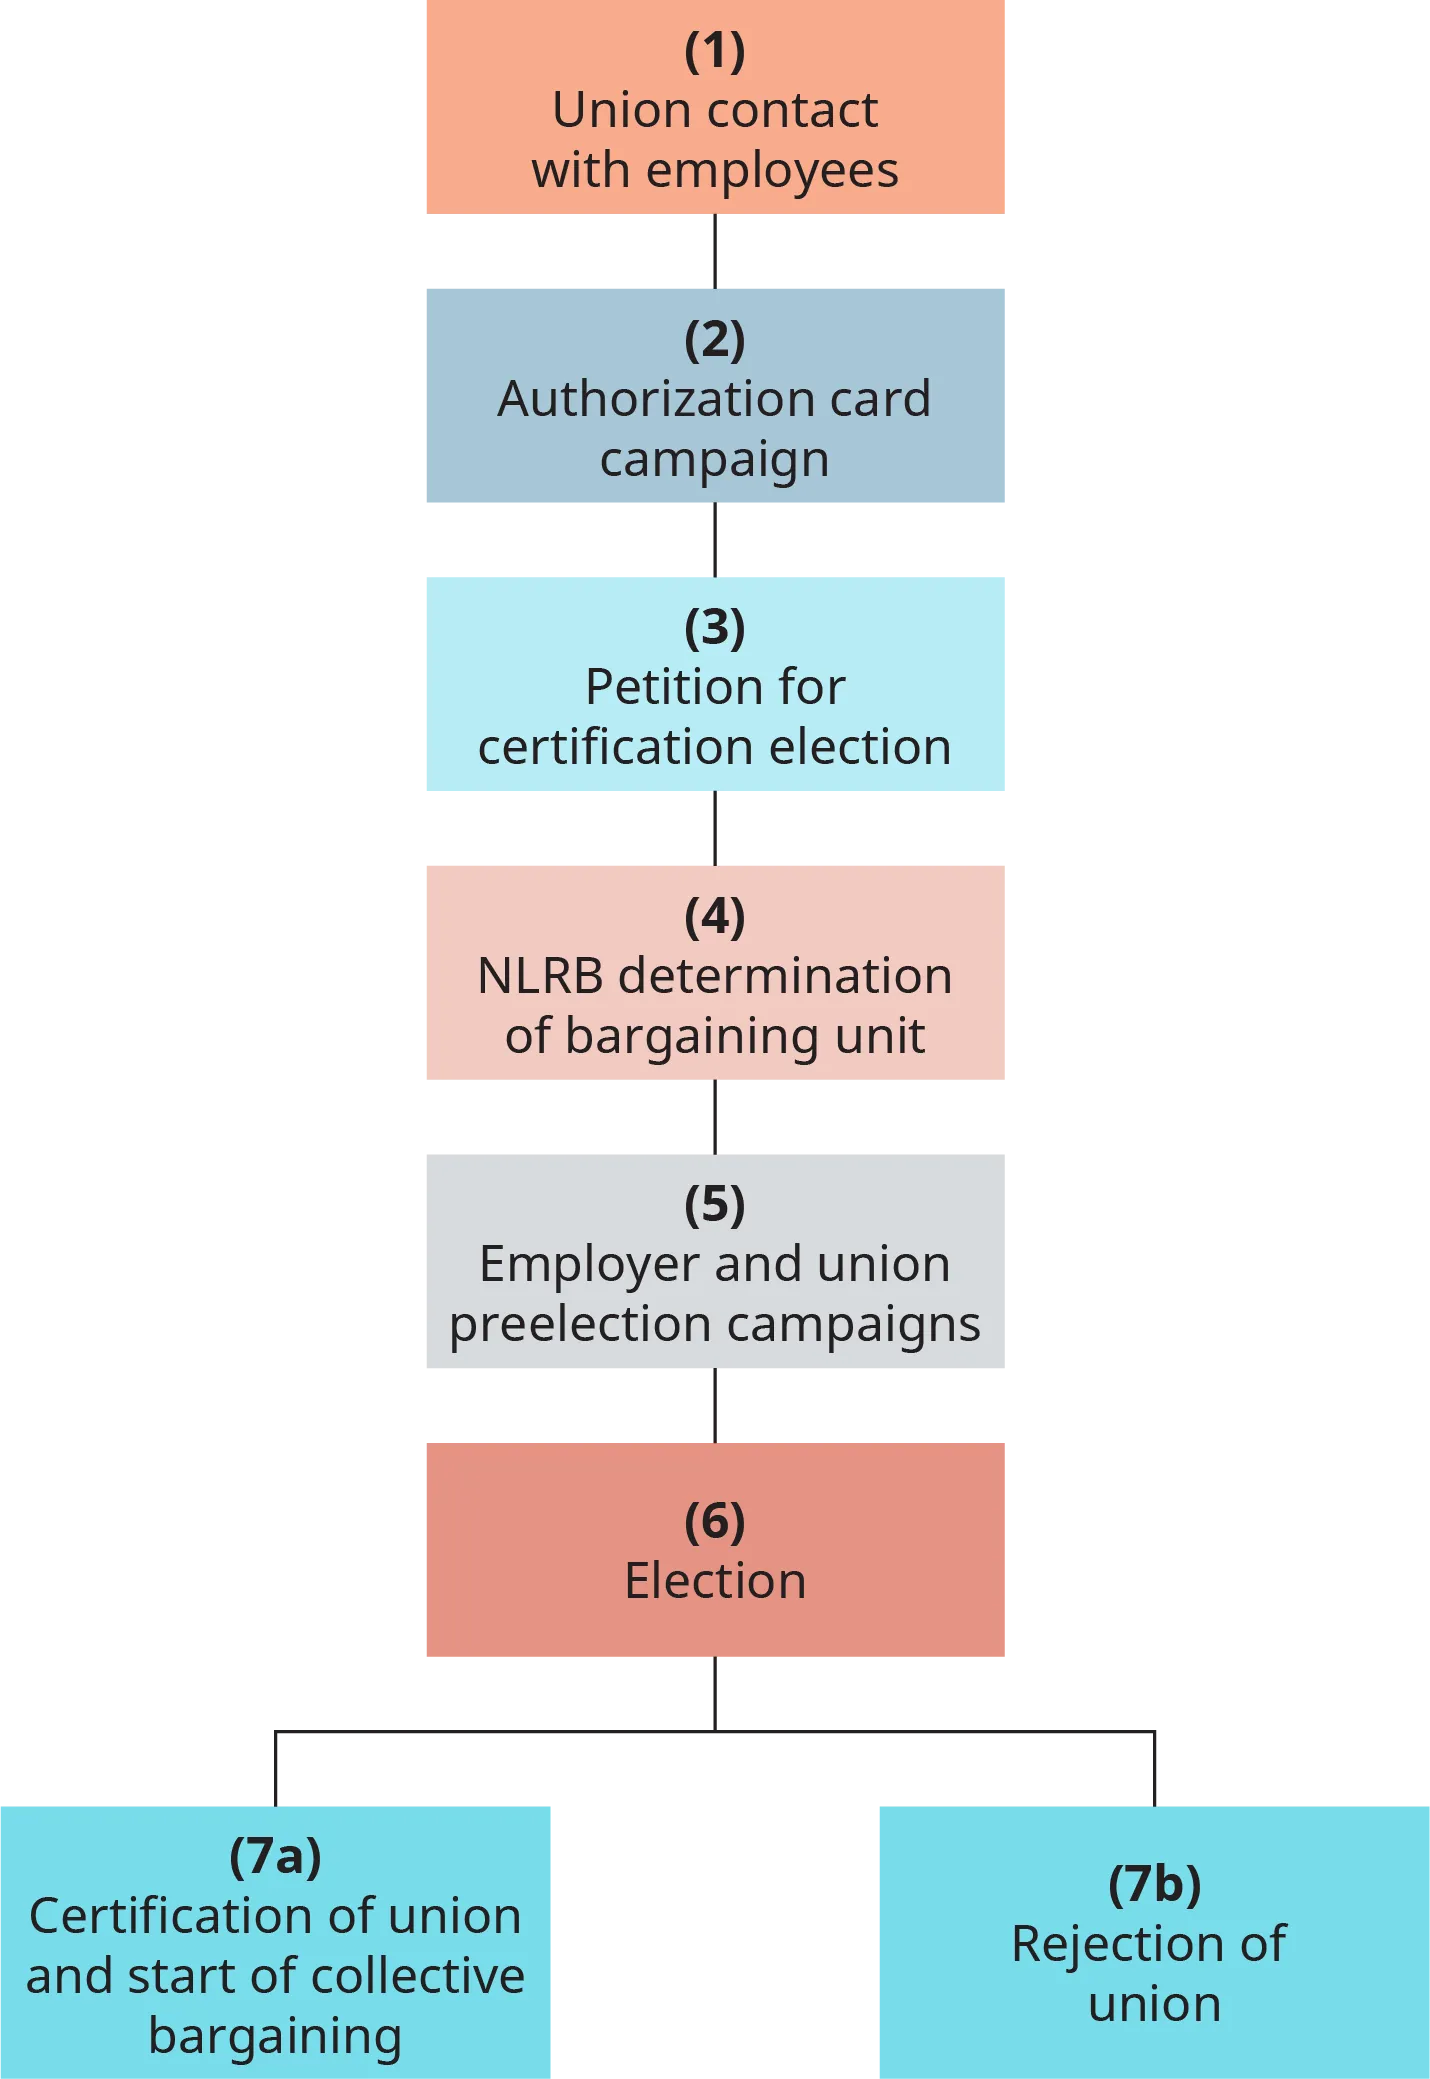 The steps are numbered 1 through 7. 1, union contact with employees. 2, authorization card campaign. 3, petition for certification election. 4, N L R B determination of bargaining unit. 5, employer and union pre election campaigns. 6, election. 7 a, certification of union and start of collective bargaining. 7 b, rejection of union.